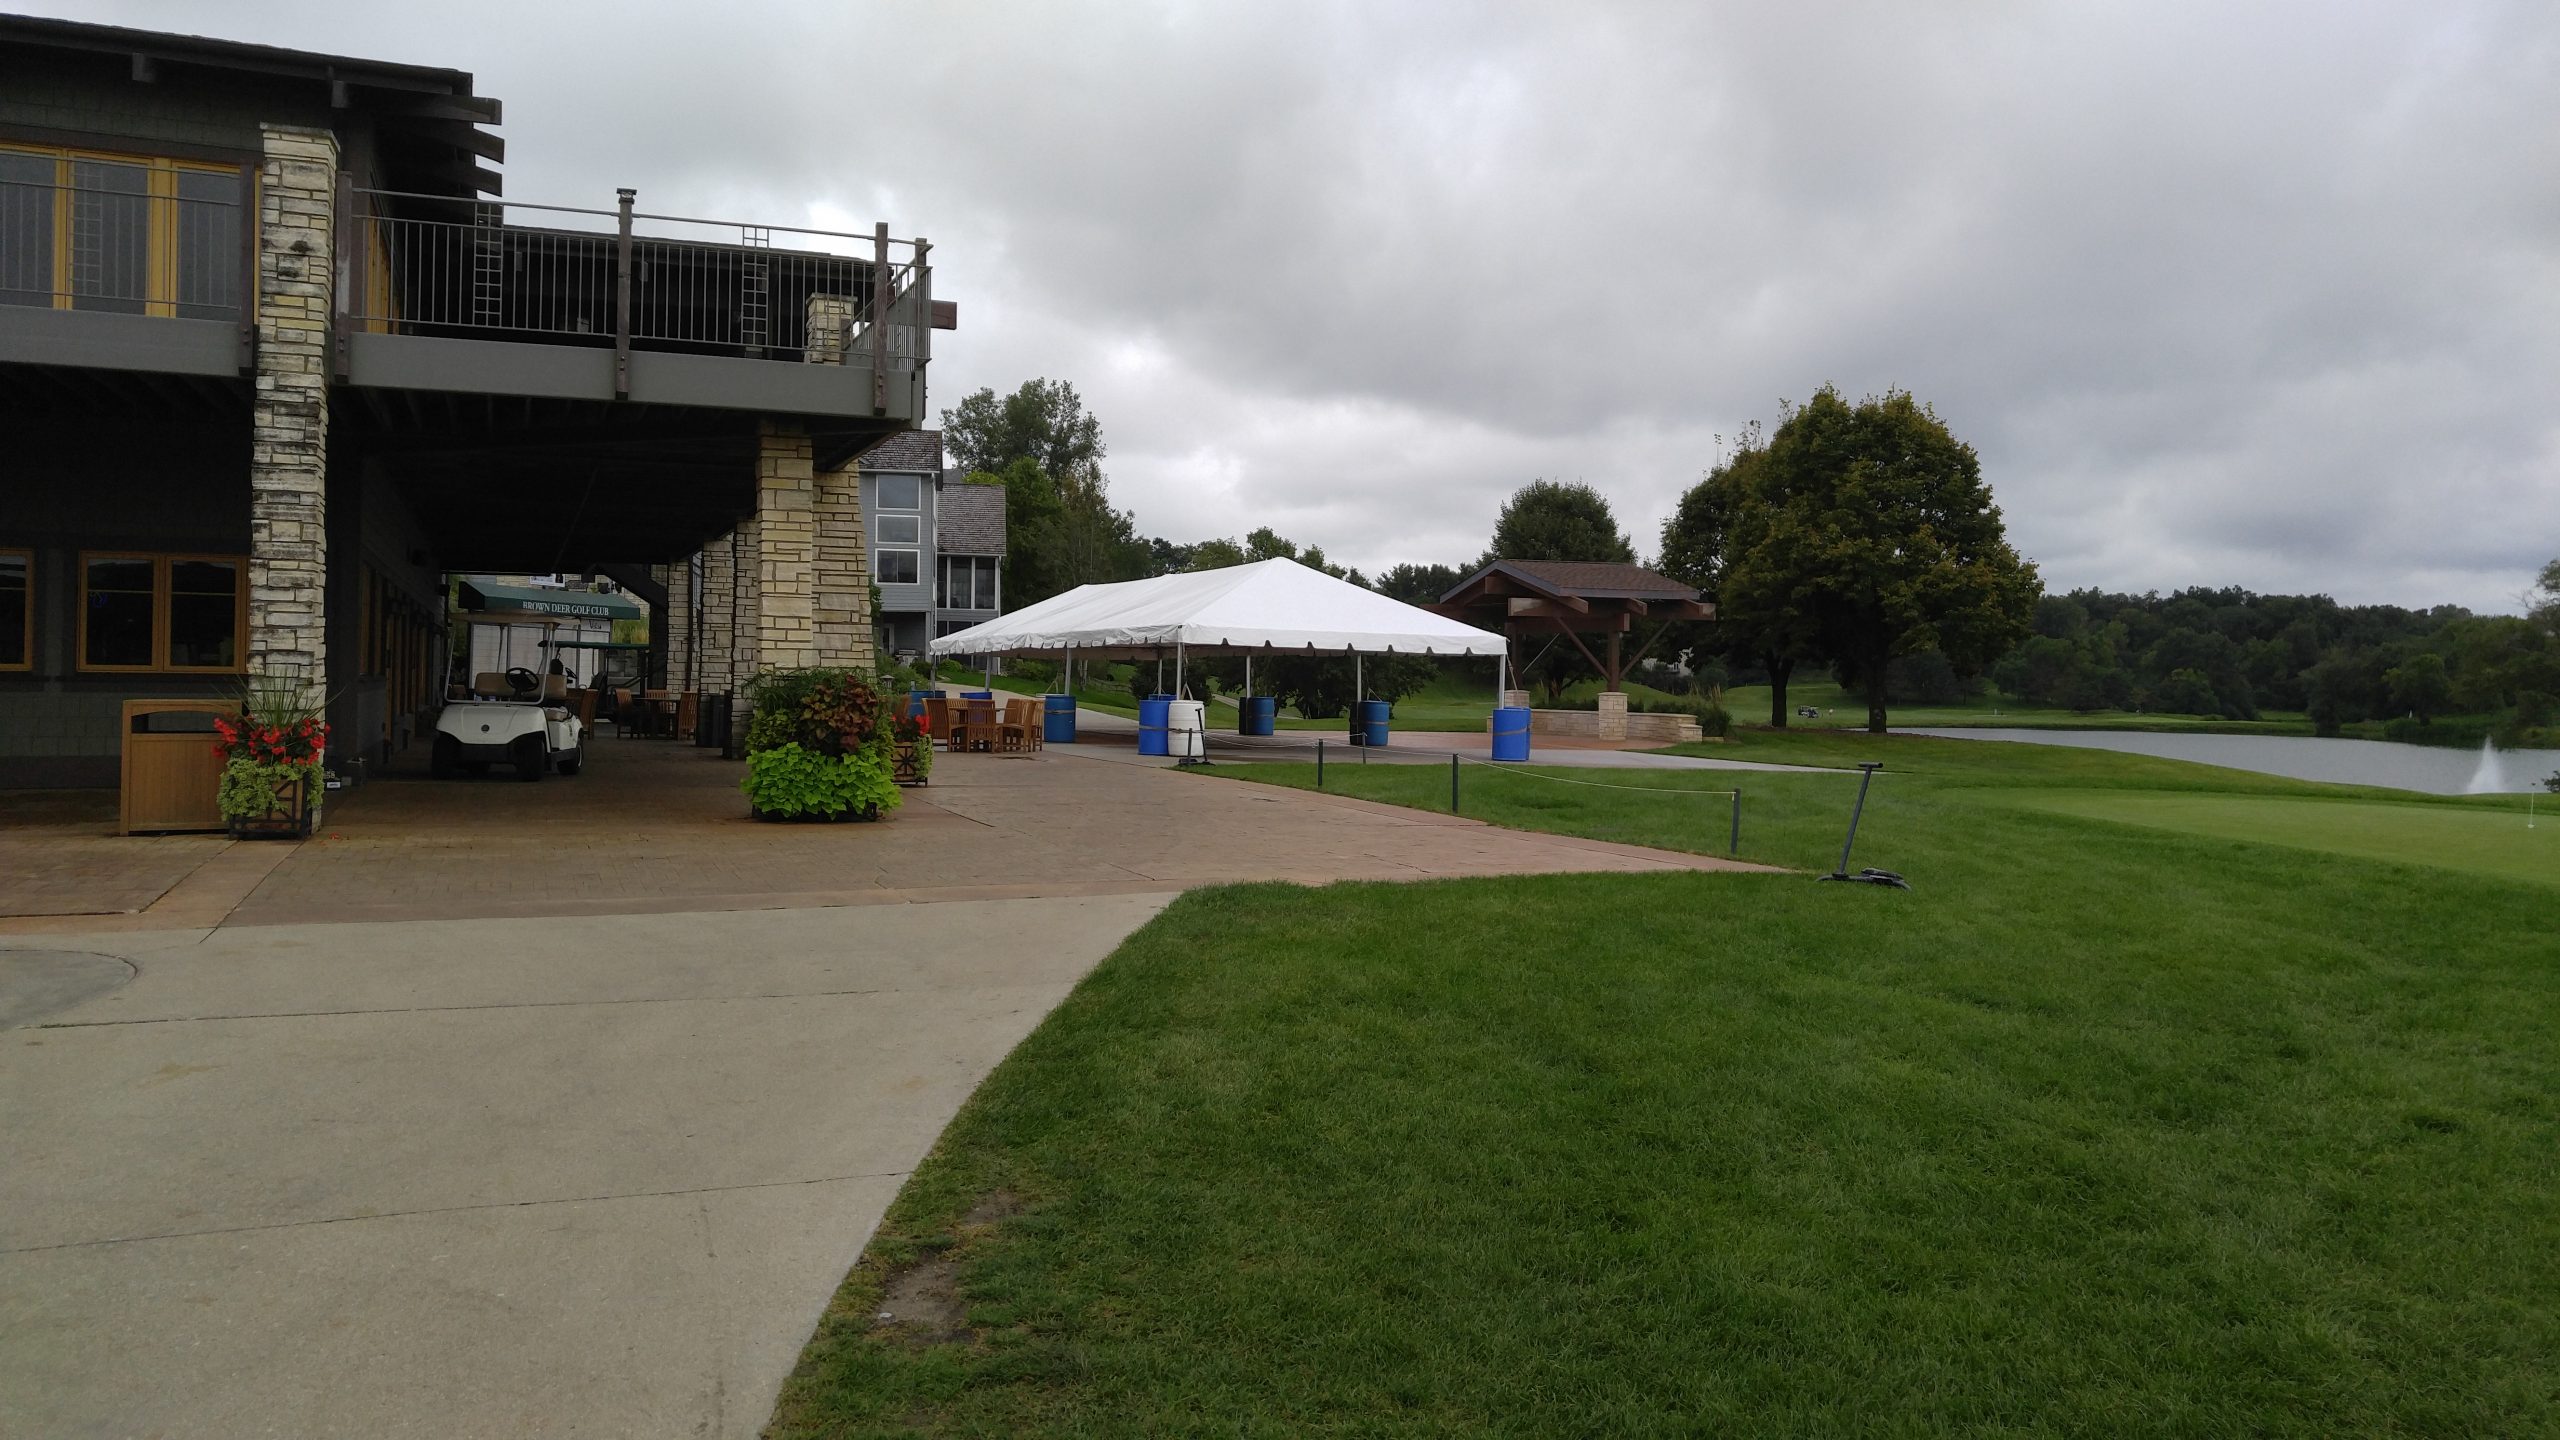 20' x 60' frame tent at Brown Deer Golf Club in Coralville